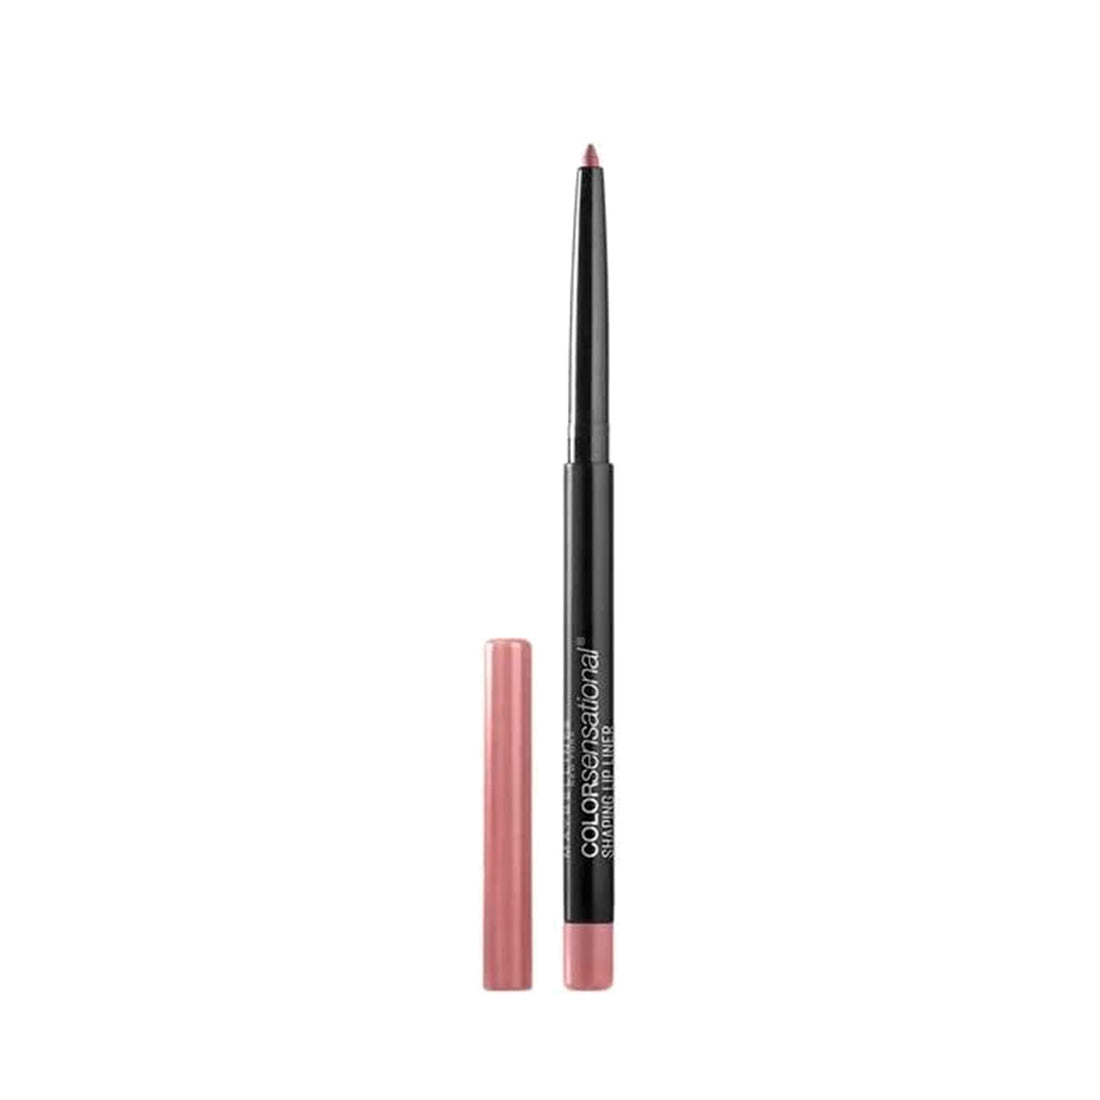 Lápis labial Maybelline Color Sensational Shaping No. 50 Dusty Rose